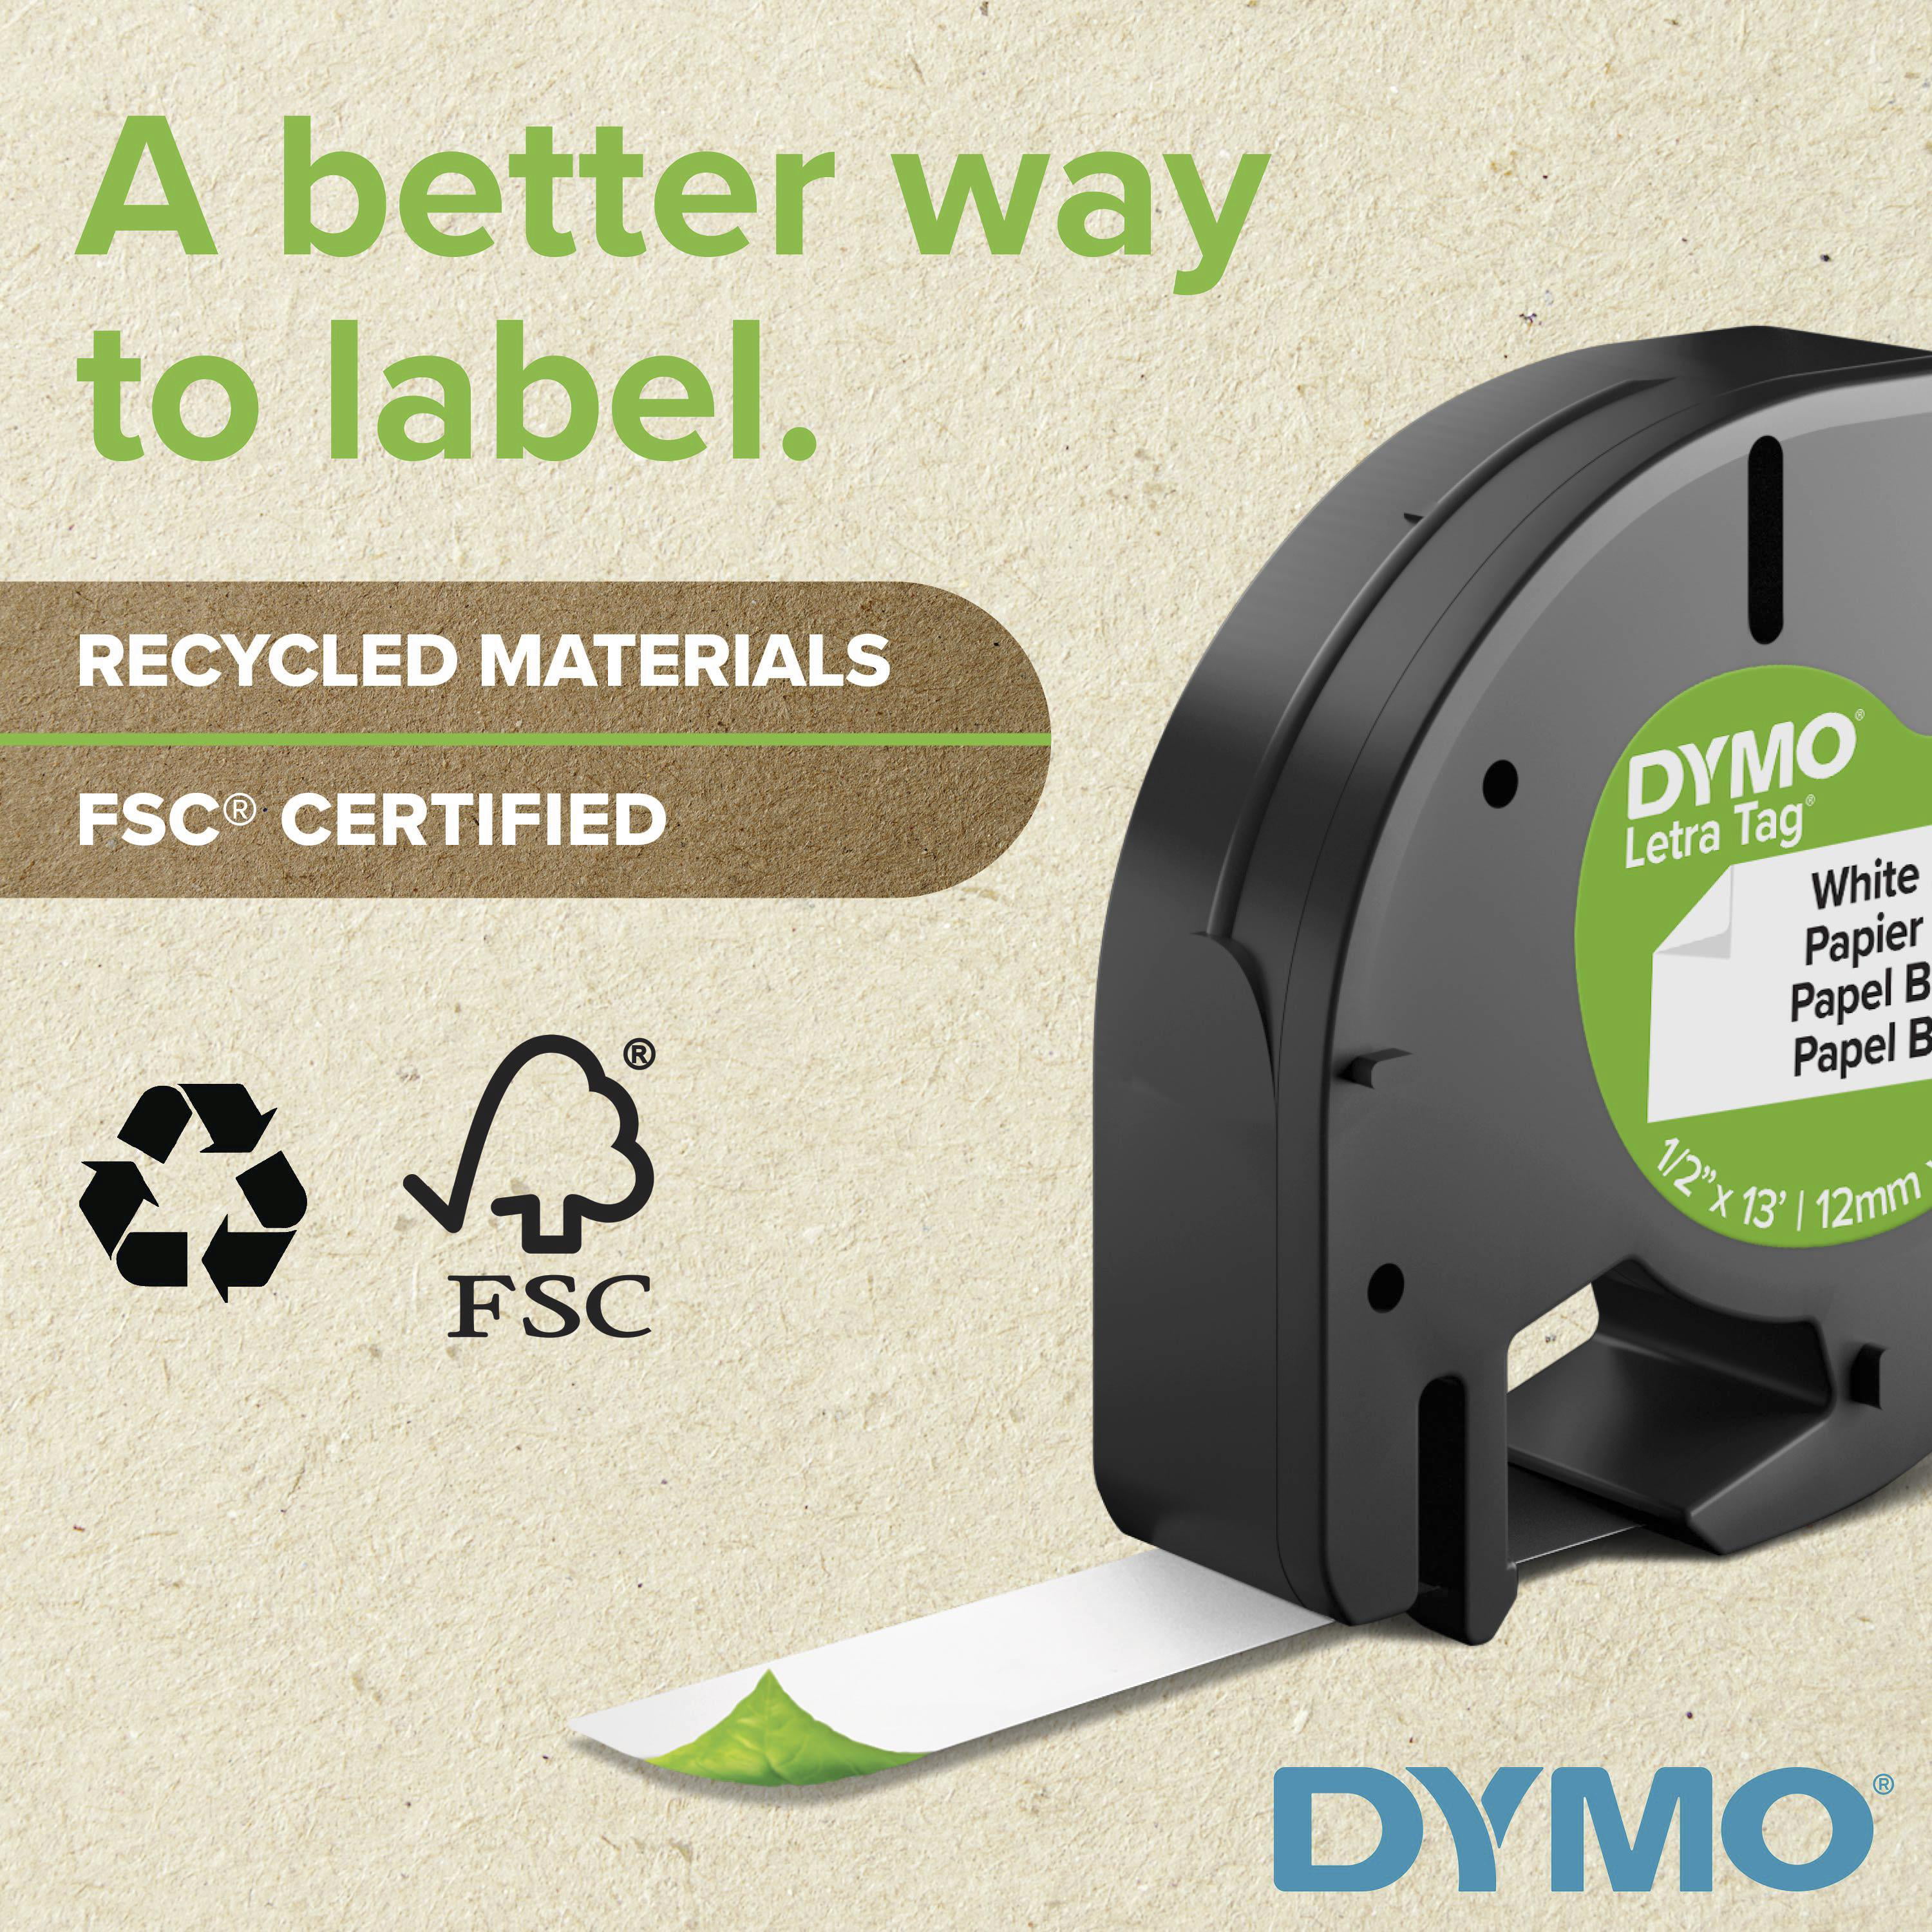 Details about   Compatible Label Tape Replacement For DYMO LetraTag Labeling Refills Paper Black 